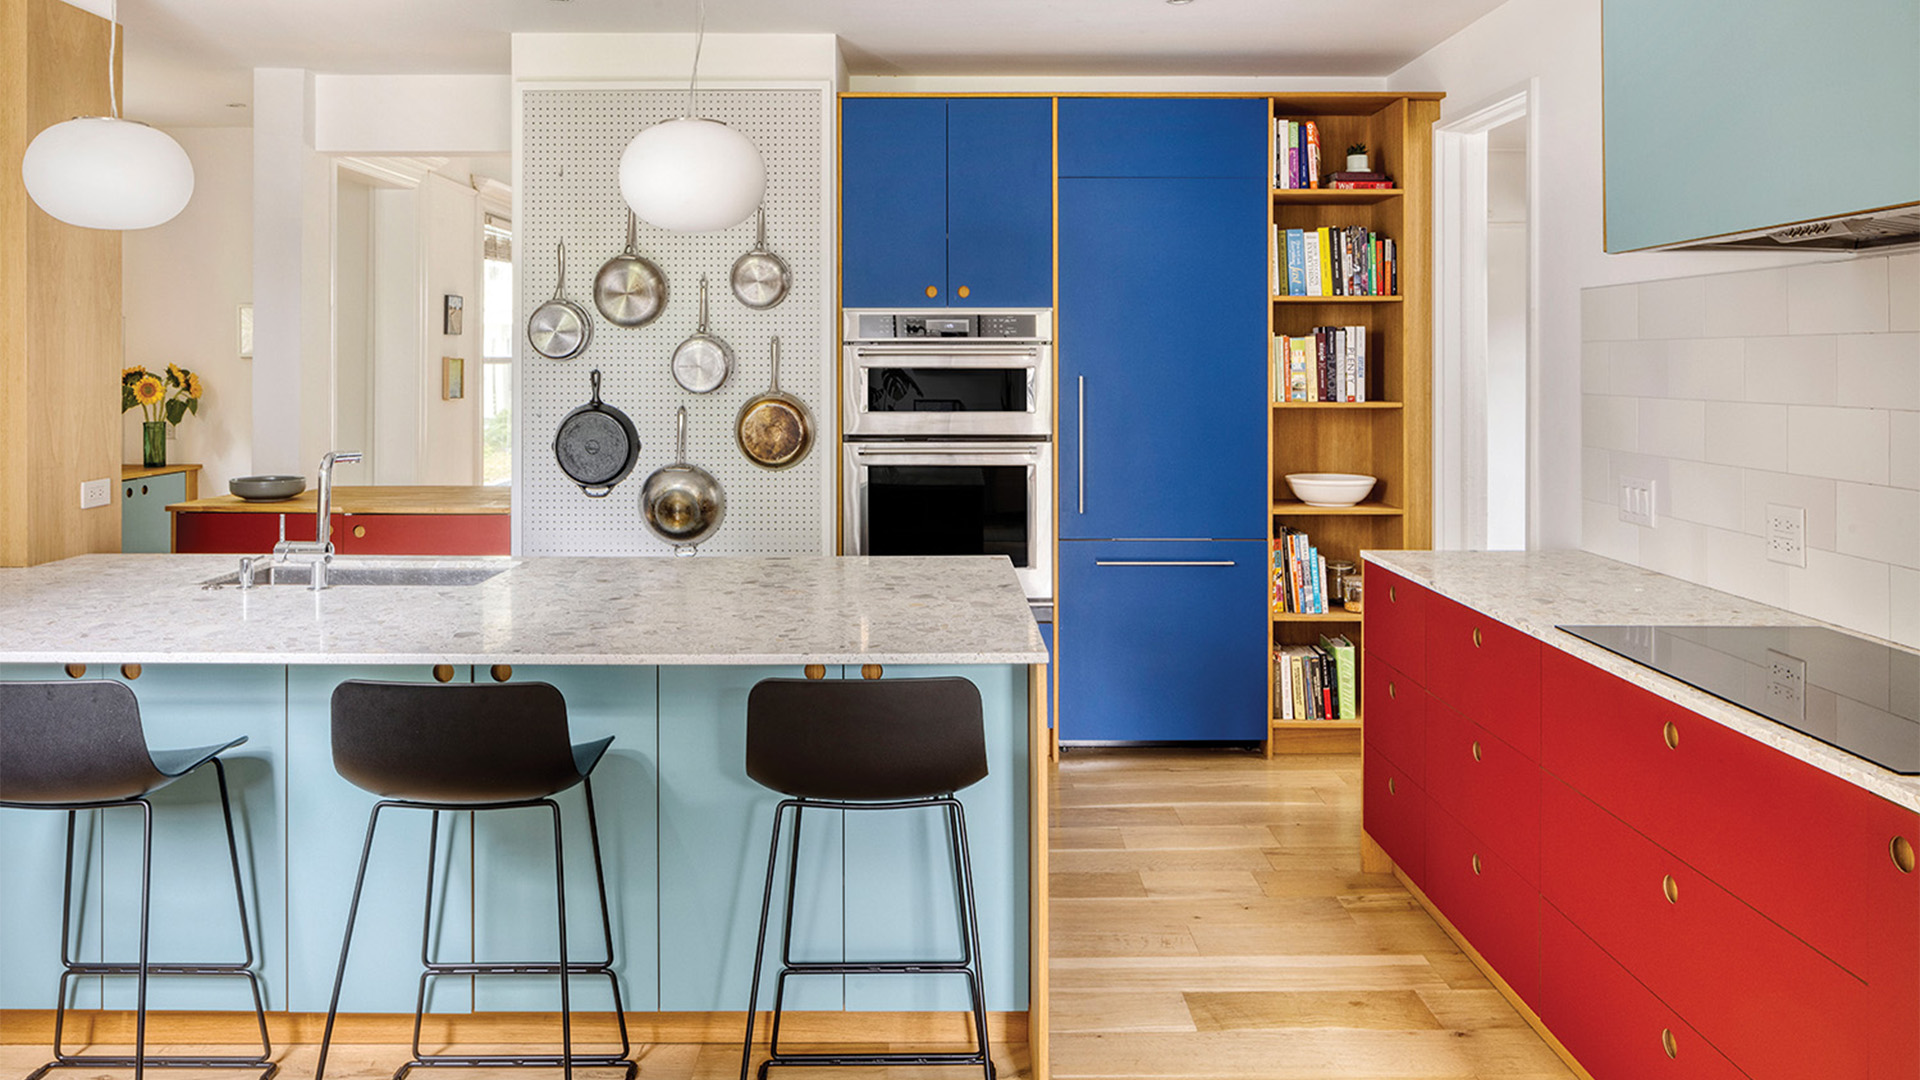 The kitchen is designed with splashes of colours